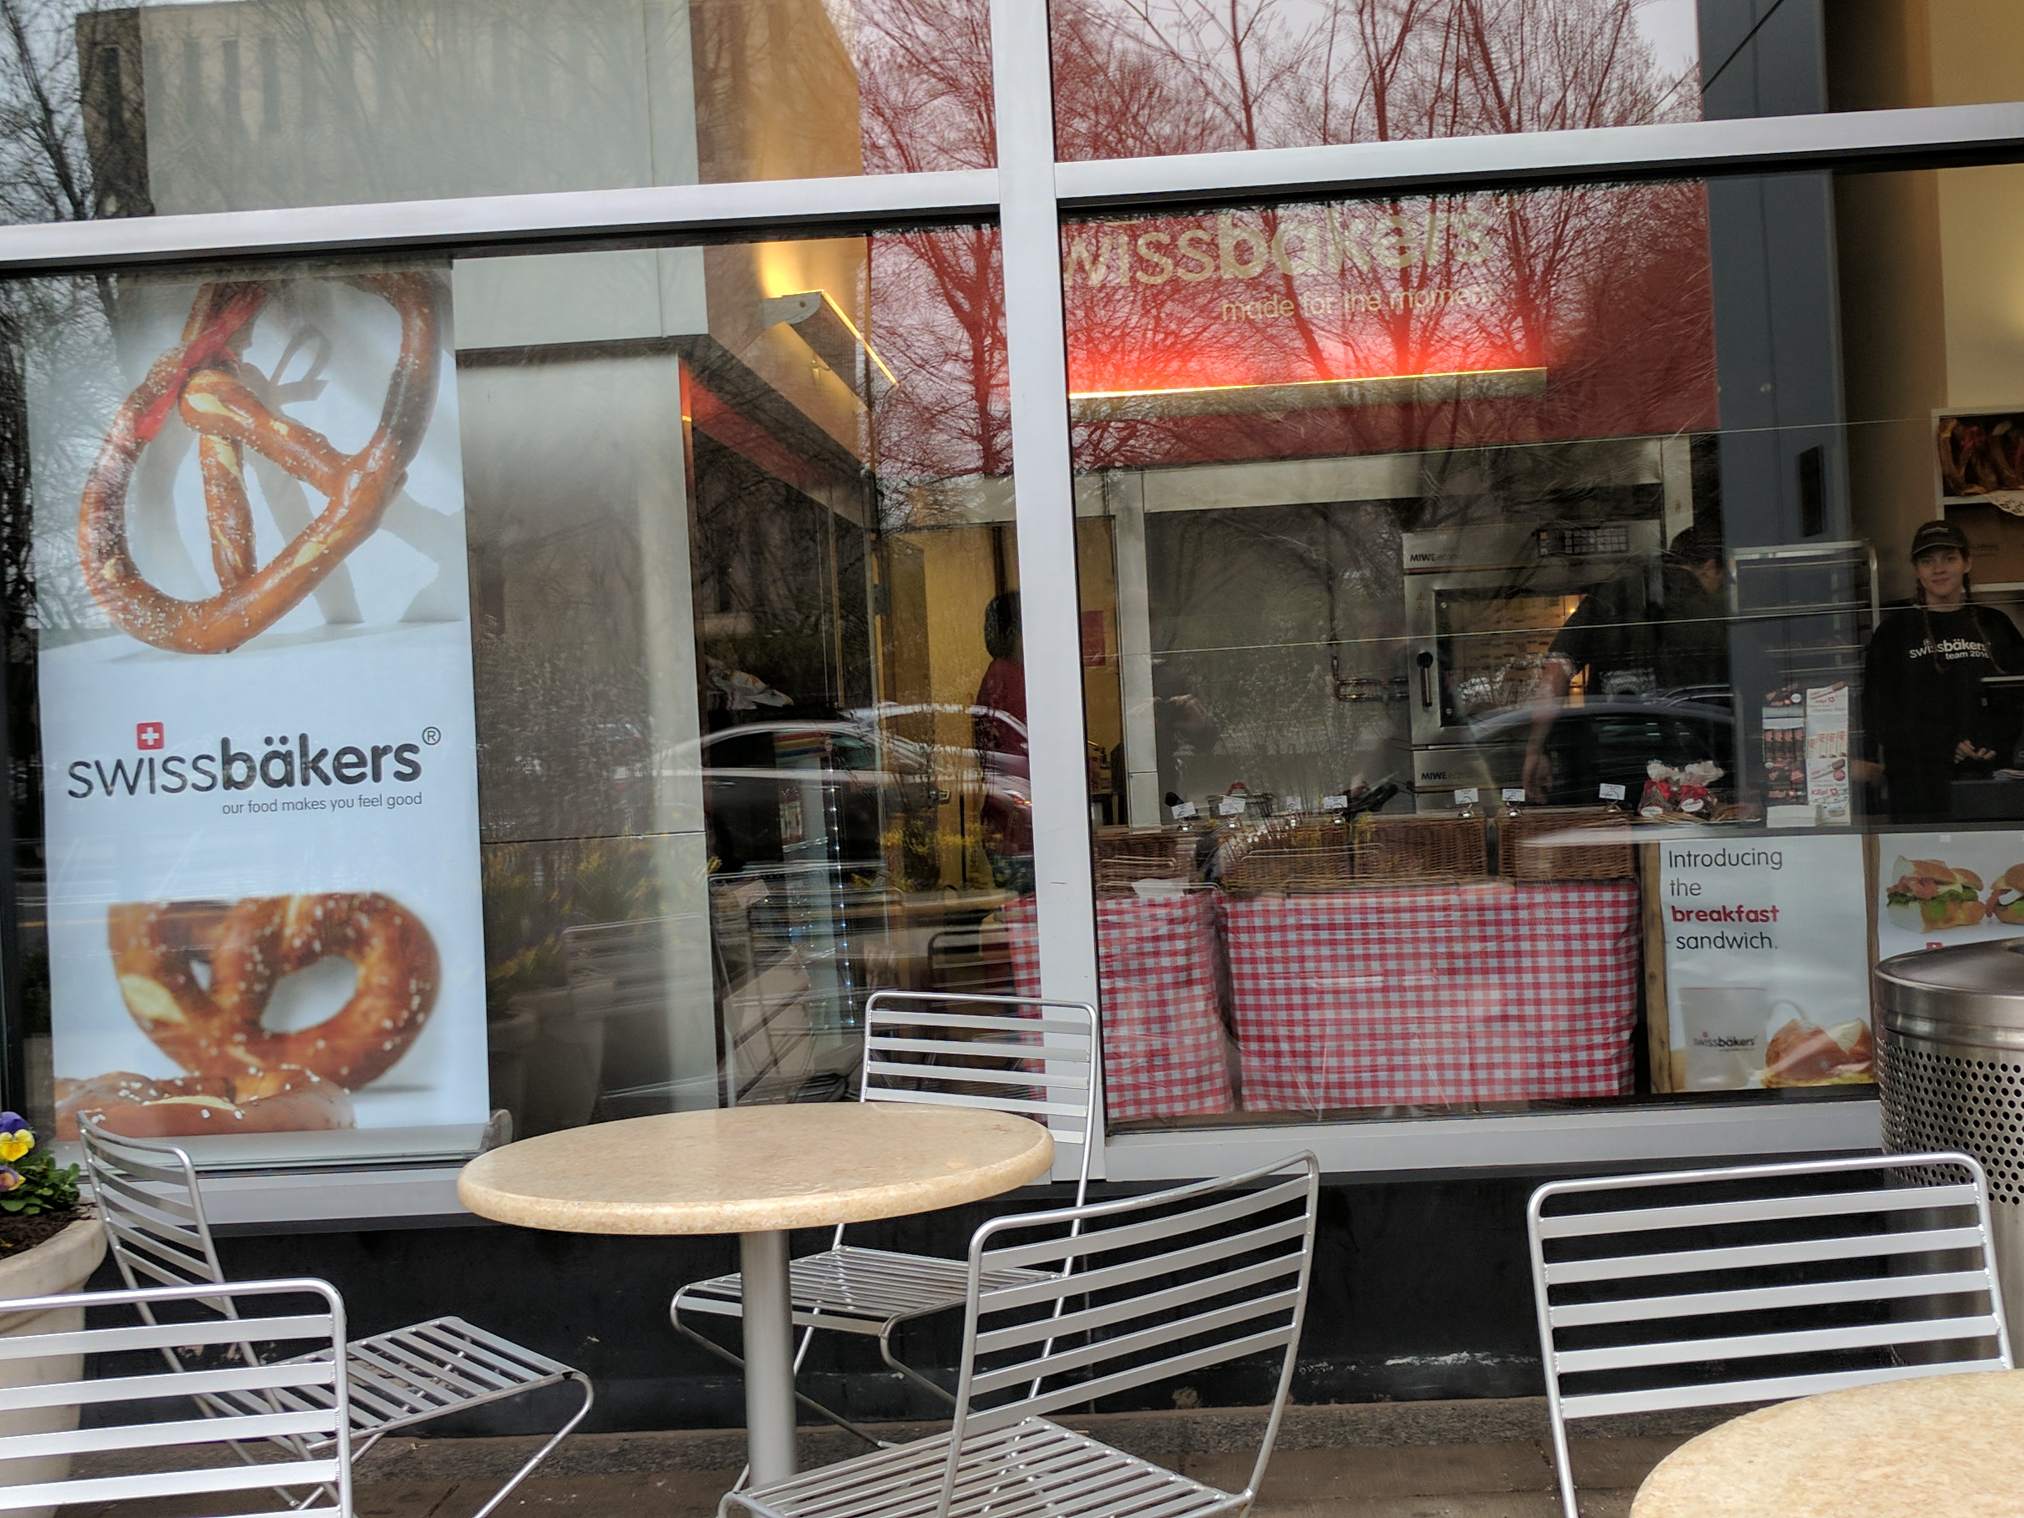 Swissbäkers in Kendall Square